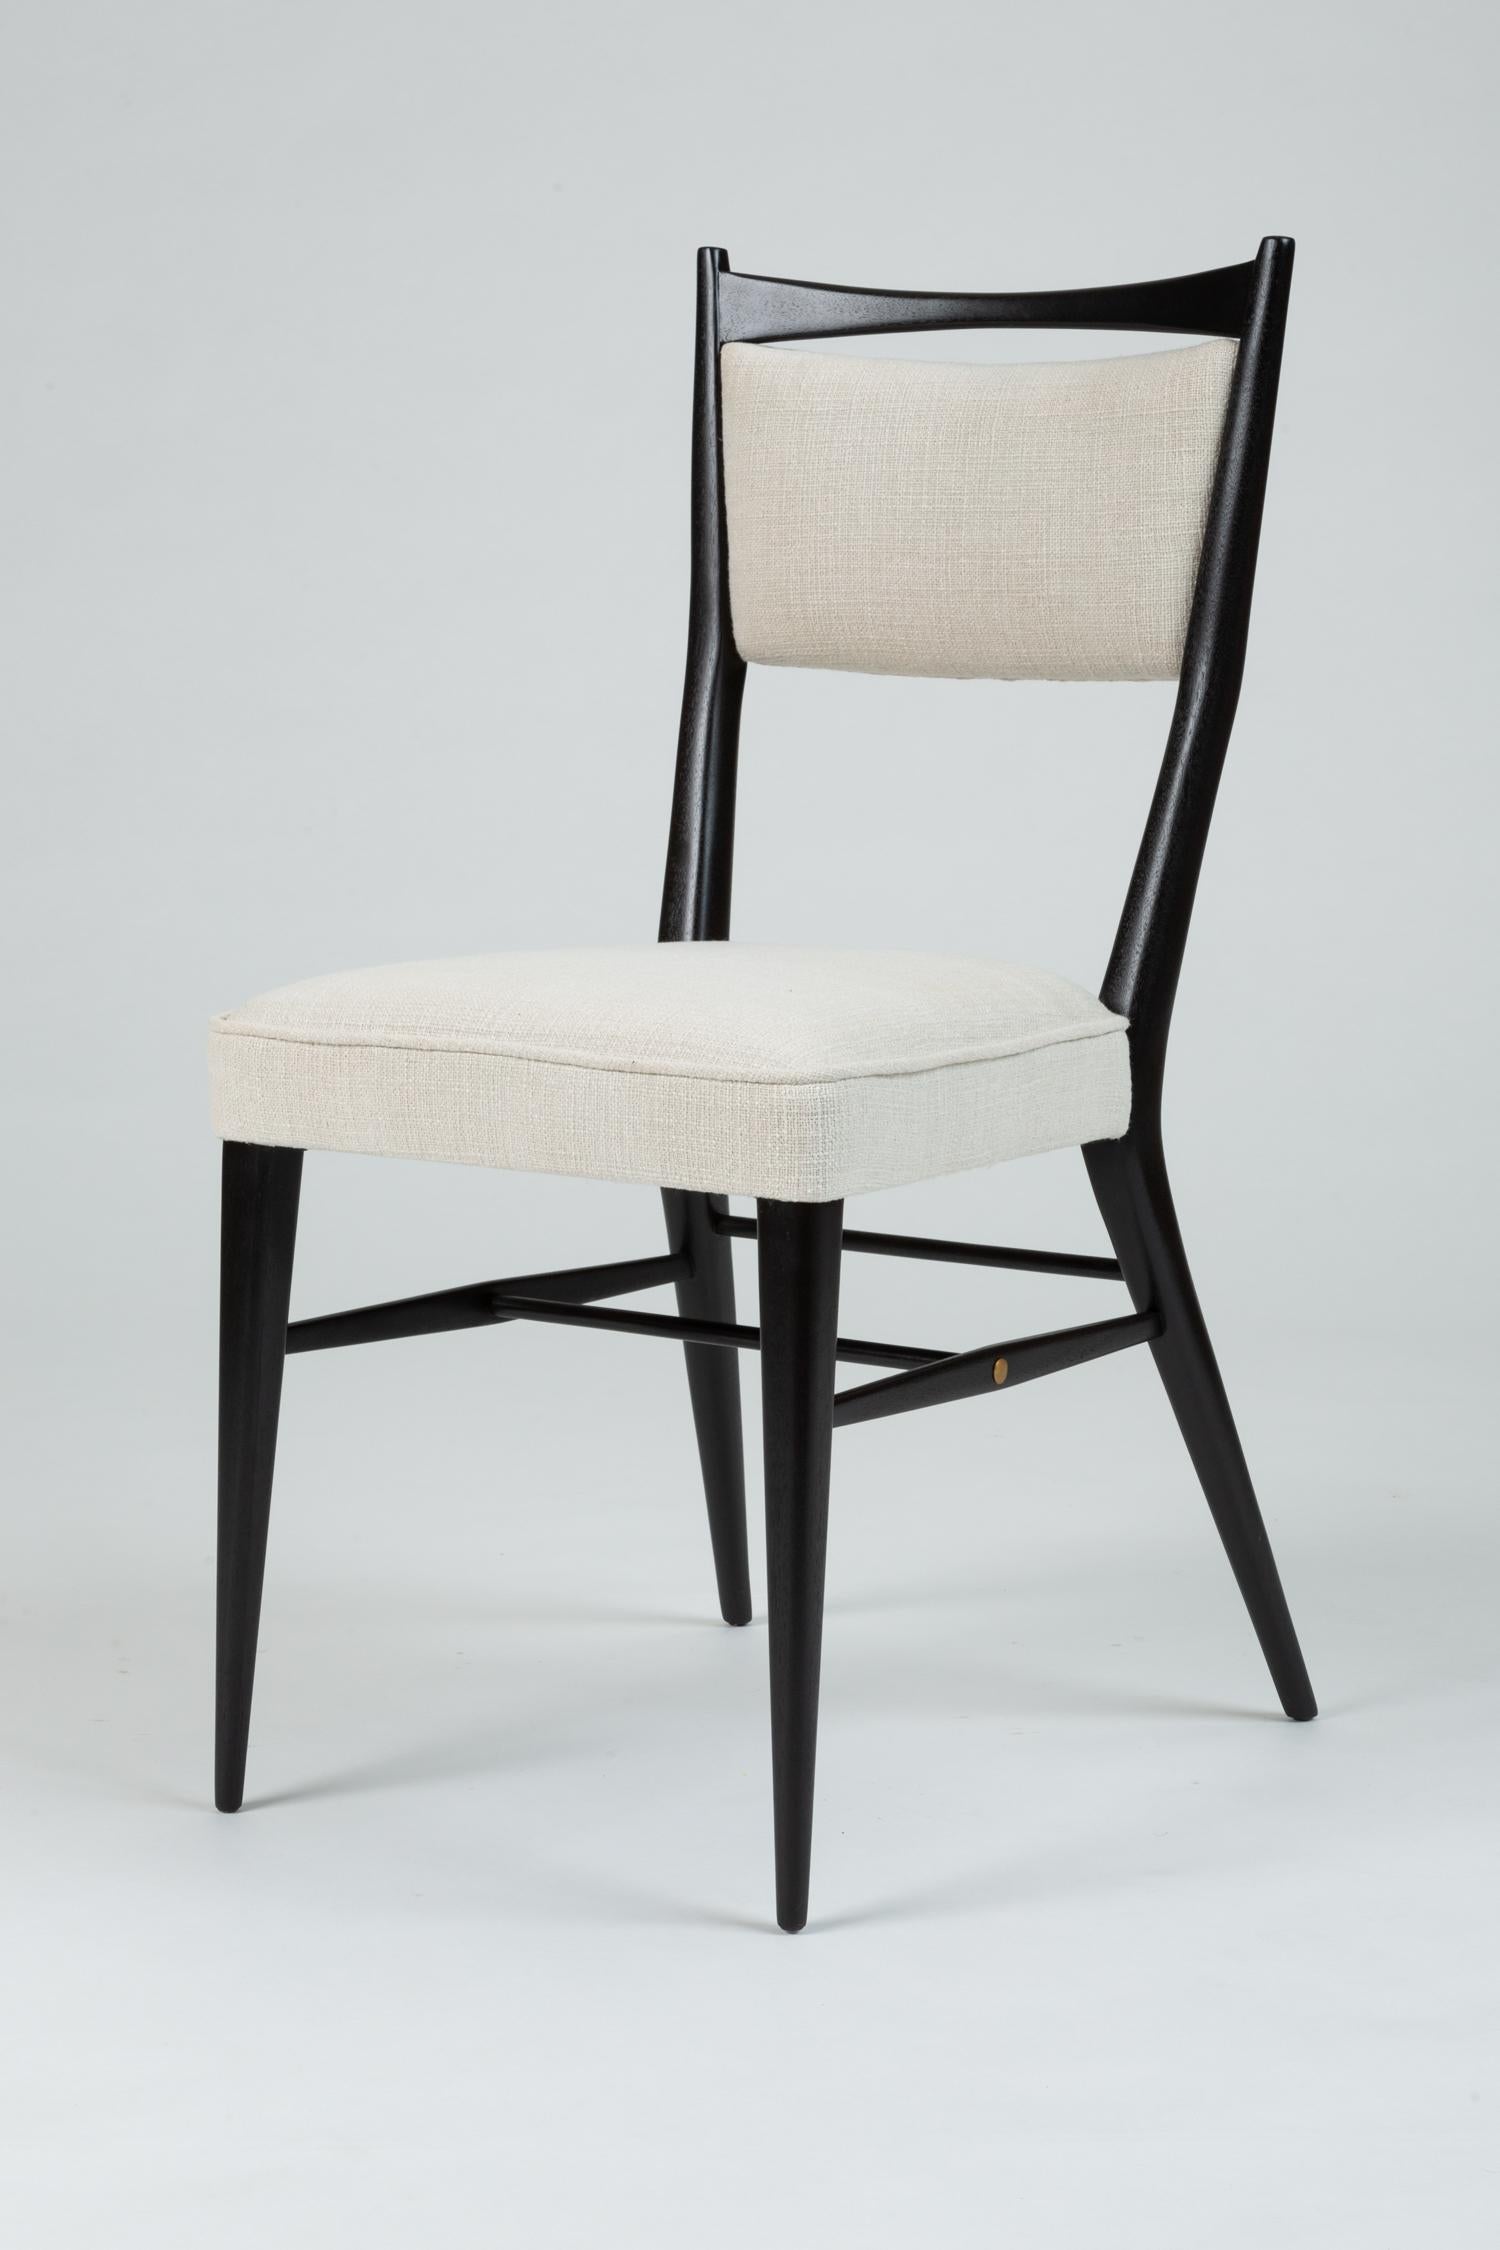 American Connoisseur Group Side Chair by Paul McCobb for H. Sacks and Sons